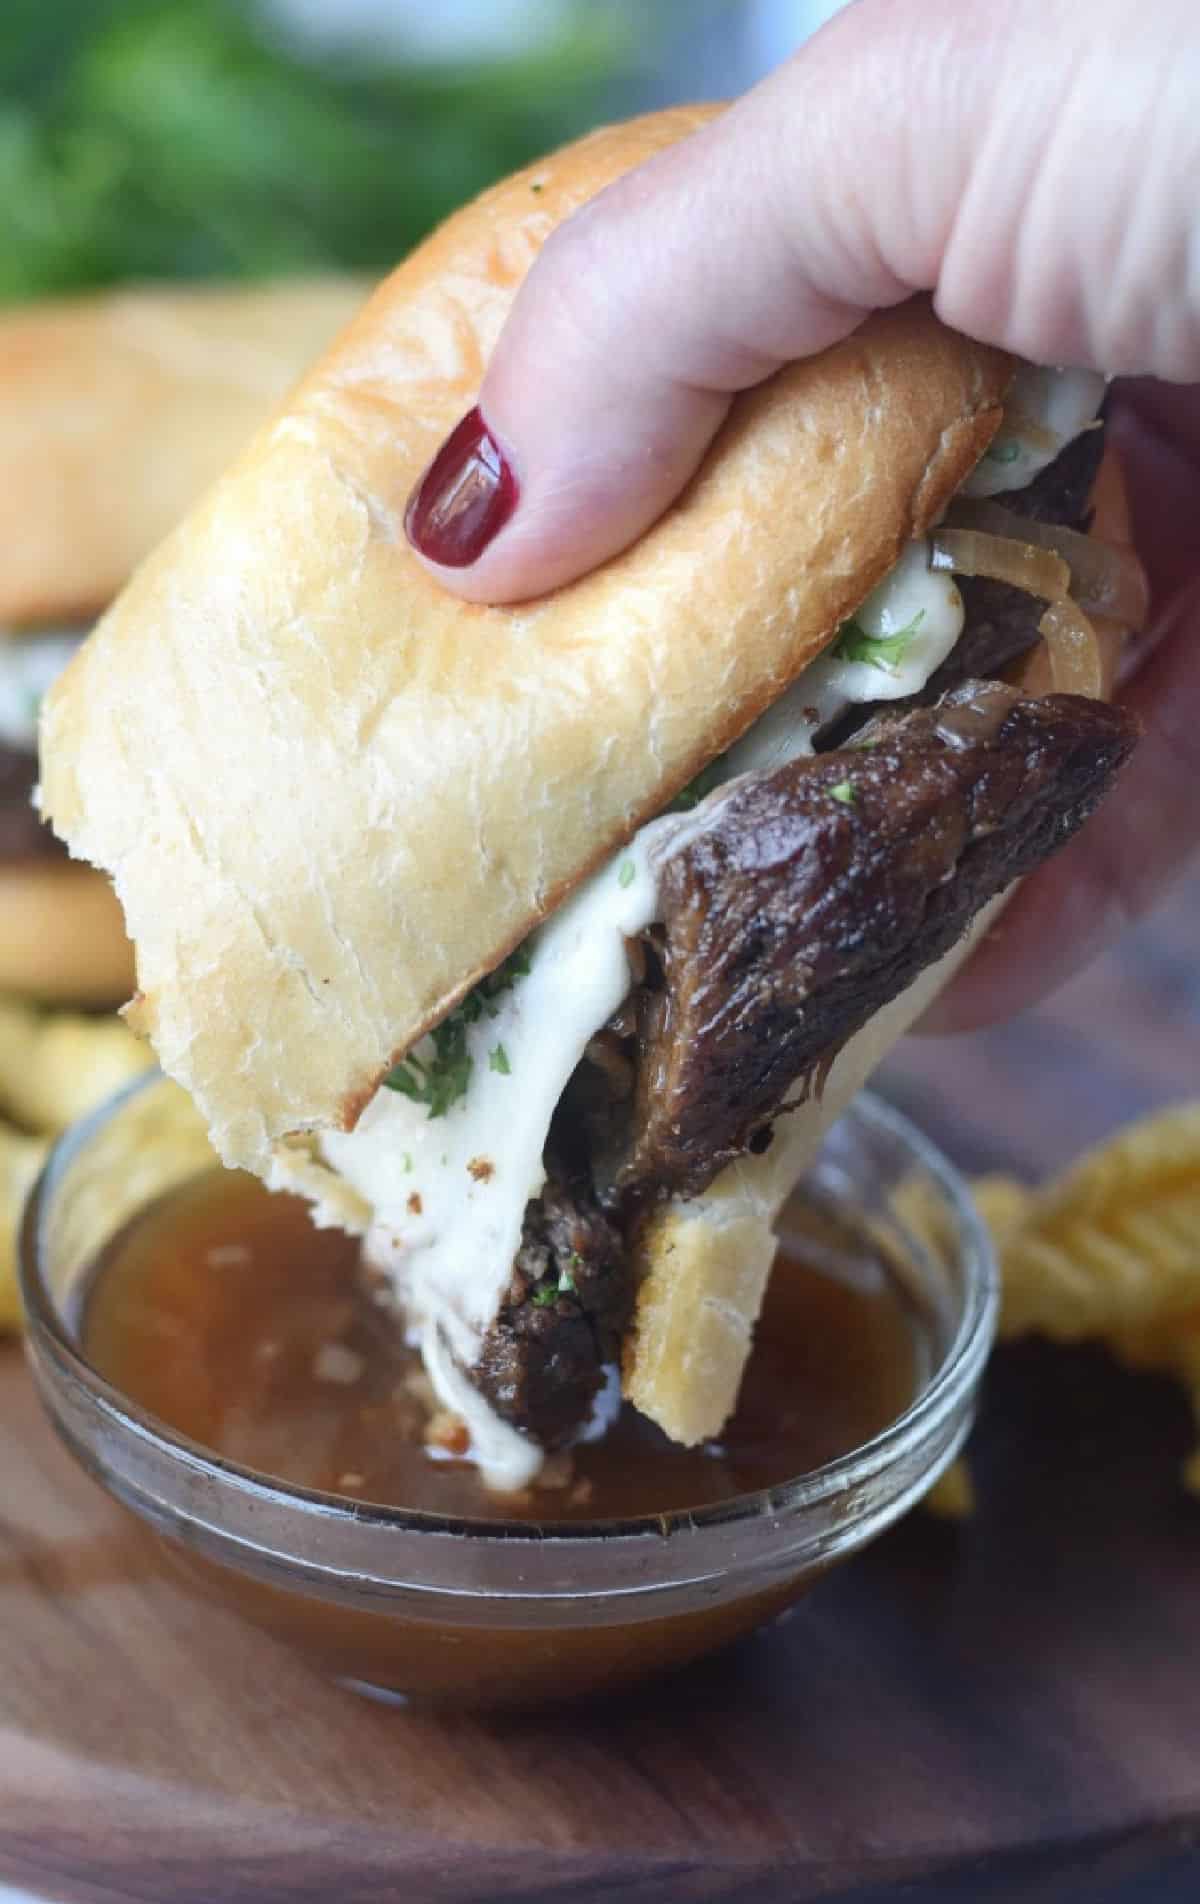 Sandwich being dipped in au jus.